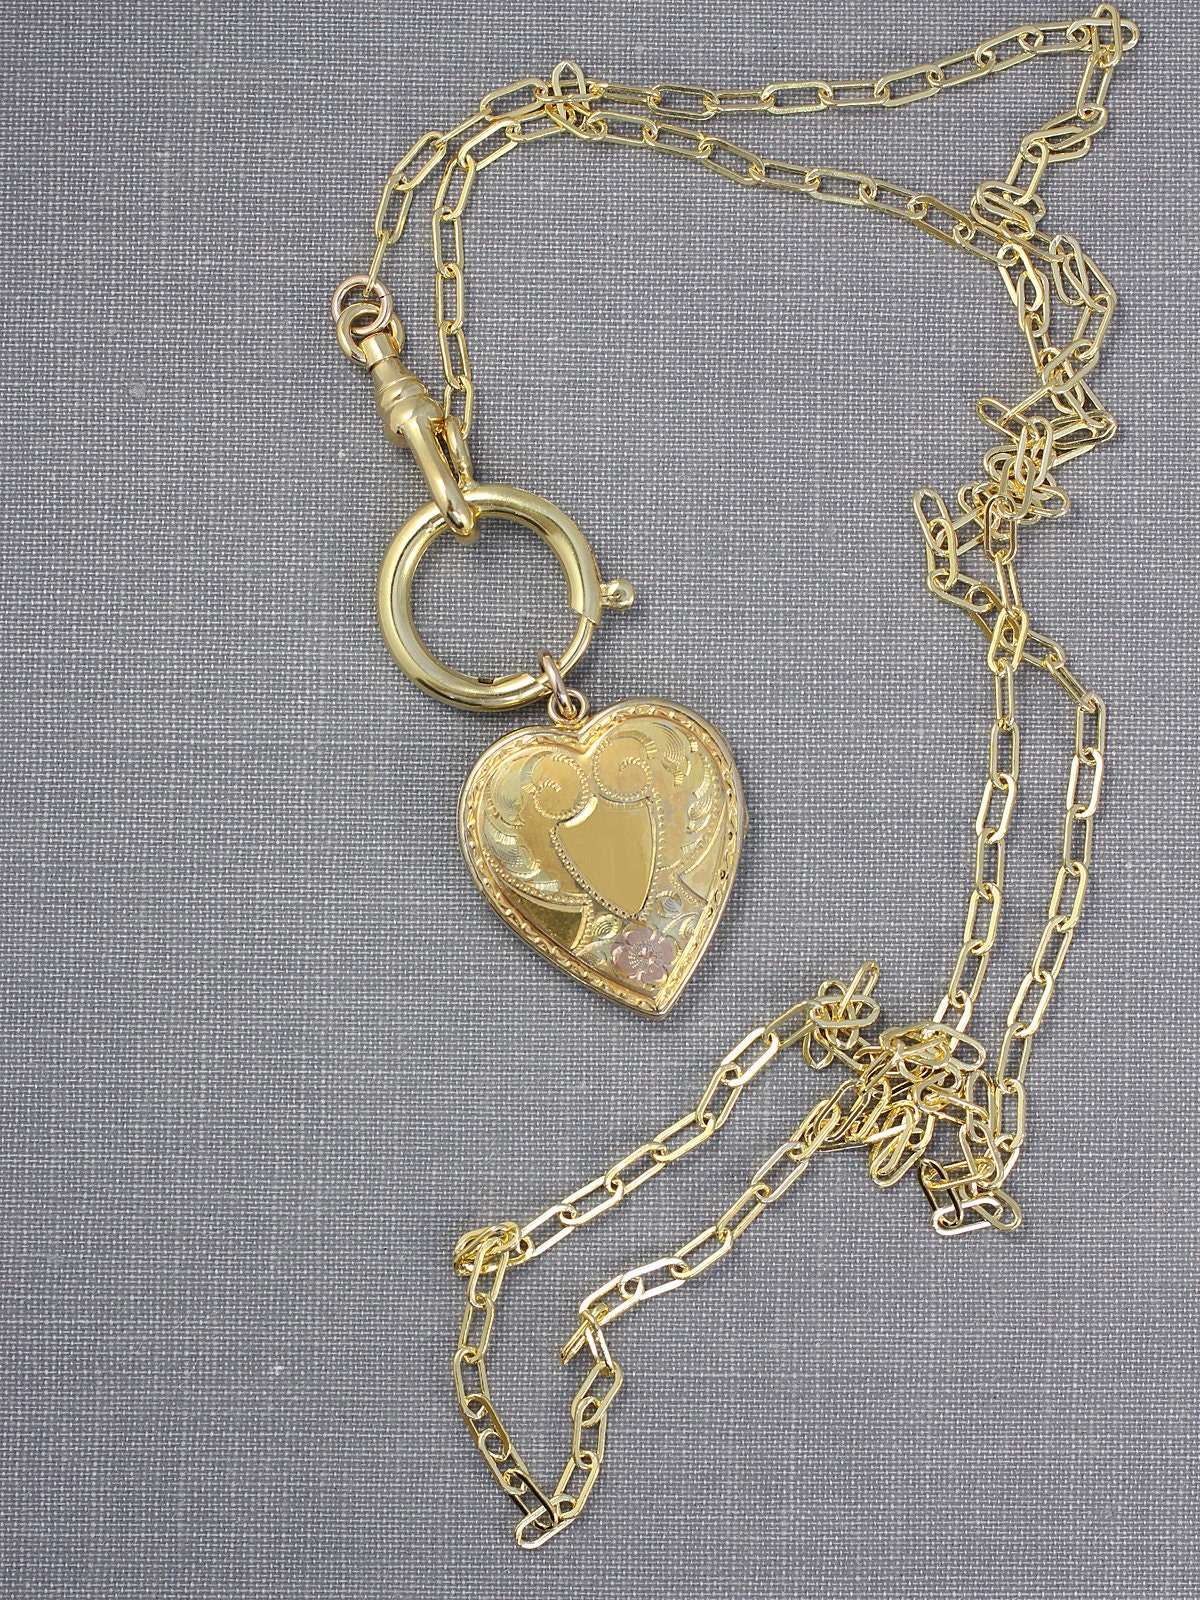 Gold Heart Locket Necklace on Special Guard Style Chain, Vintage 12K